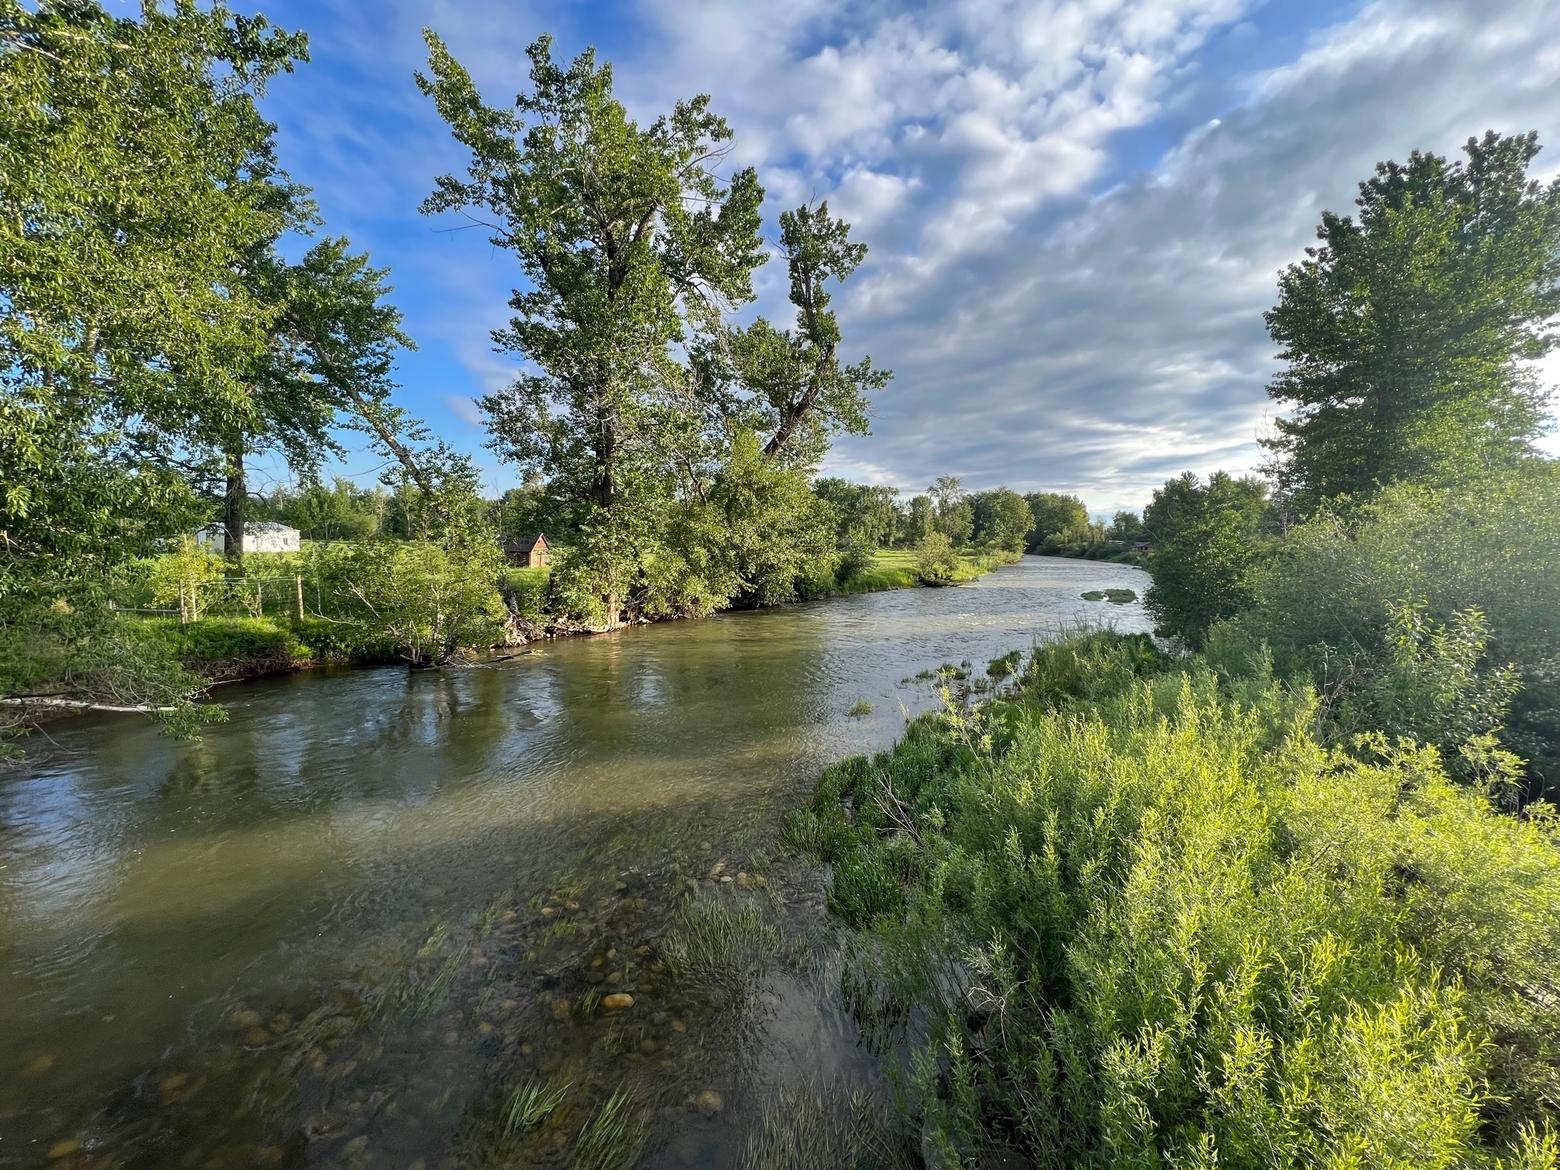 The West Gallatin River and site of the proposed 58-unit glampground called Riverbend has been a contentious issue in Gallatin Gateway for more than three years. Photo by Holly Pippel